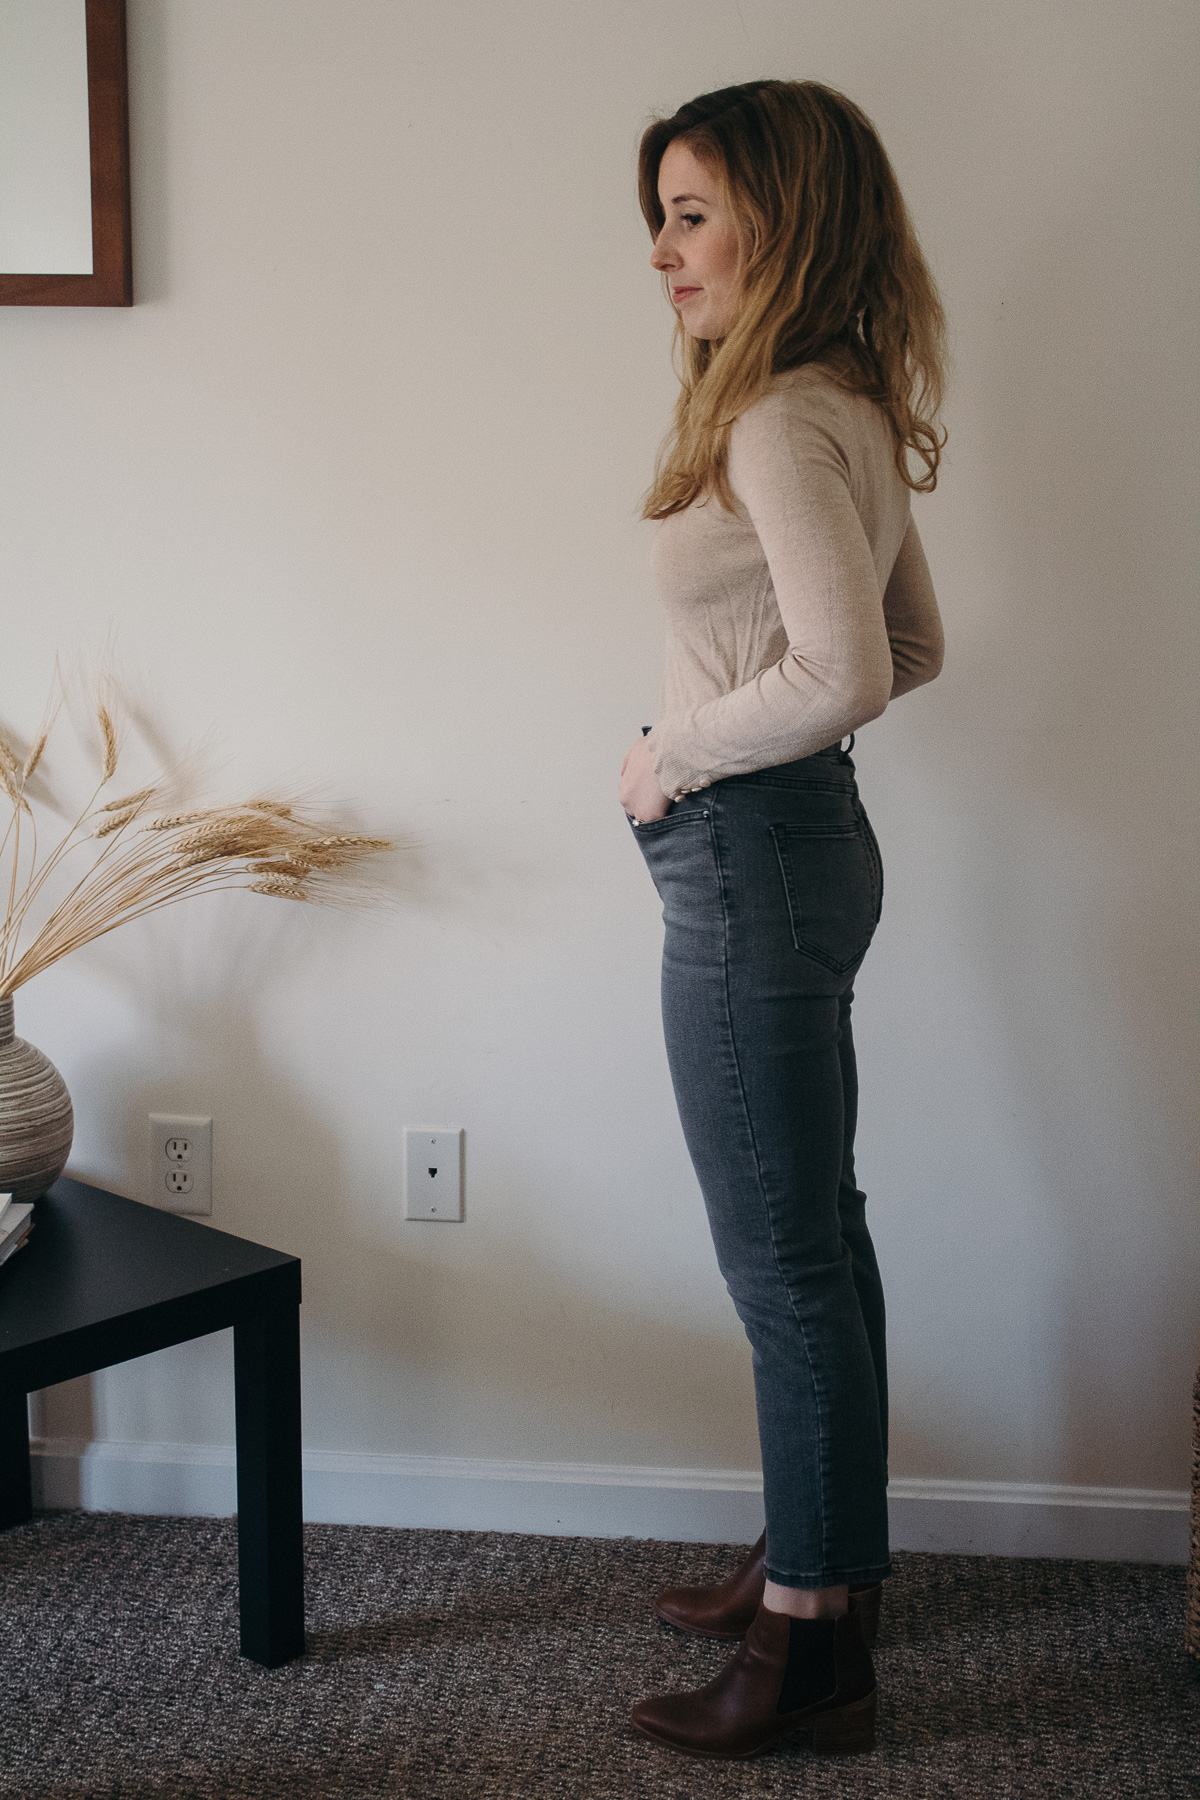 The Lavender Daily - Everlane Jeans Review